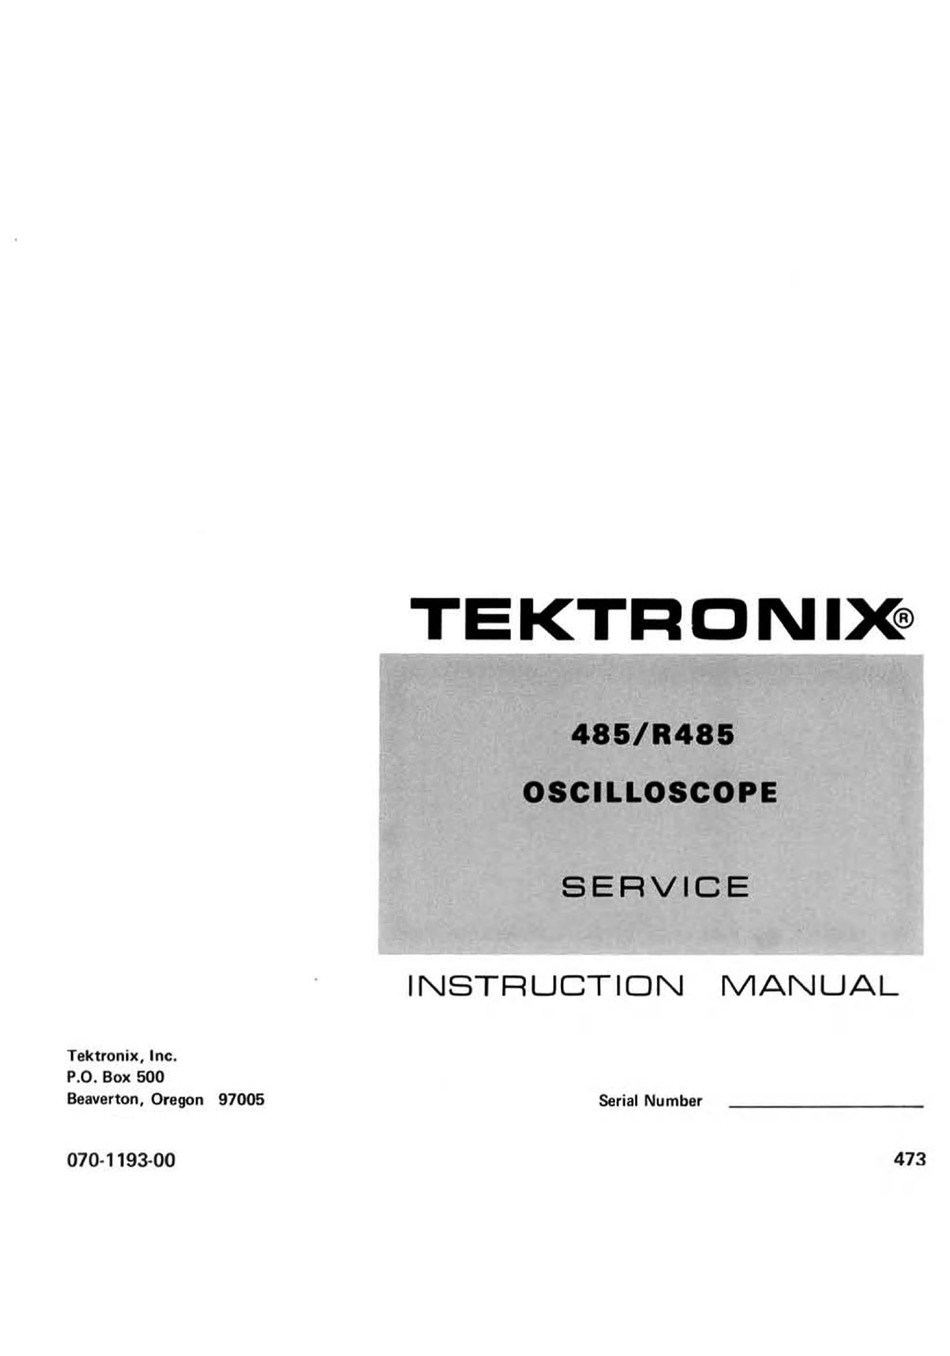 1 Service Tektronix AN/USM-425 V operating Manual With Complete Diagrams CD 